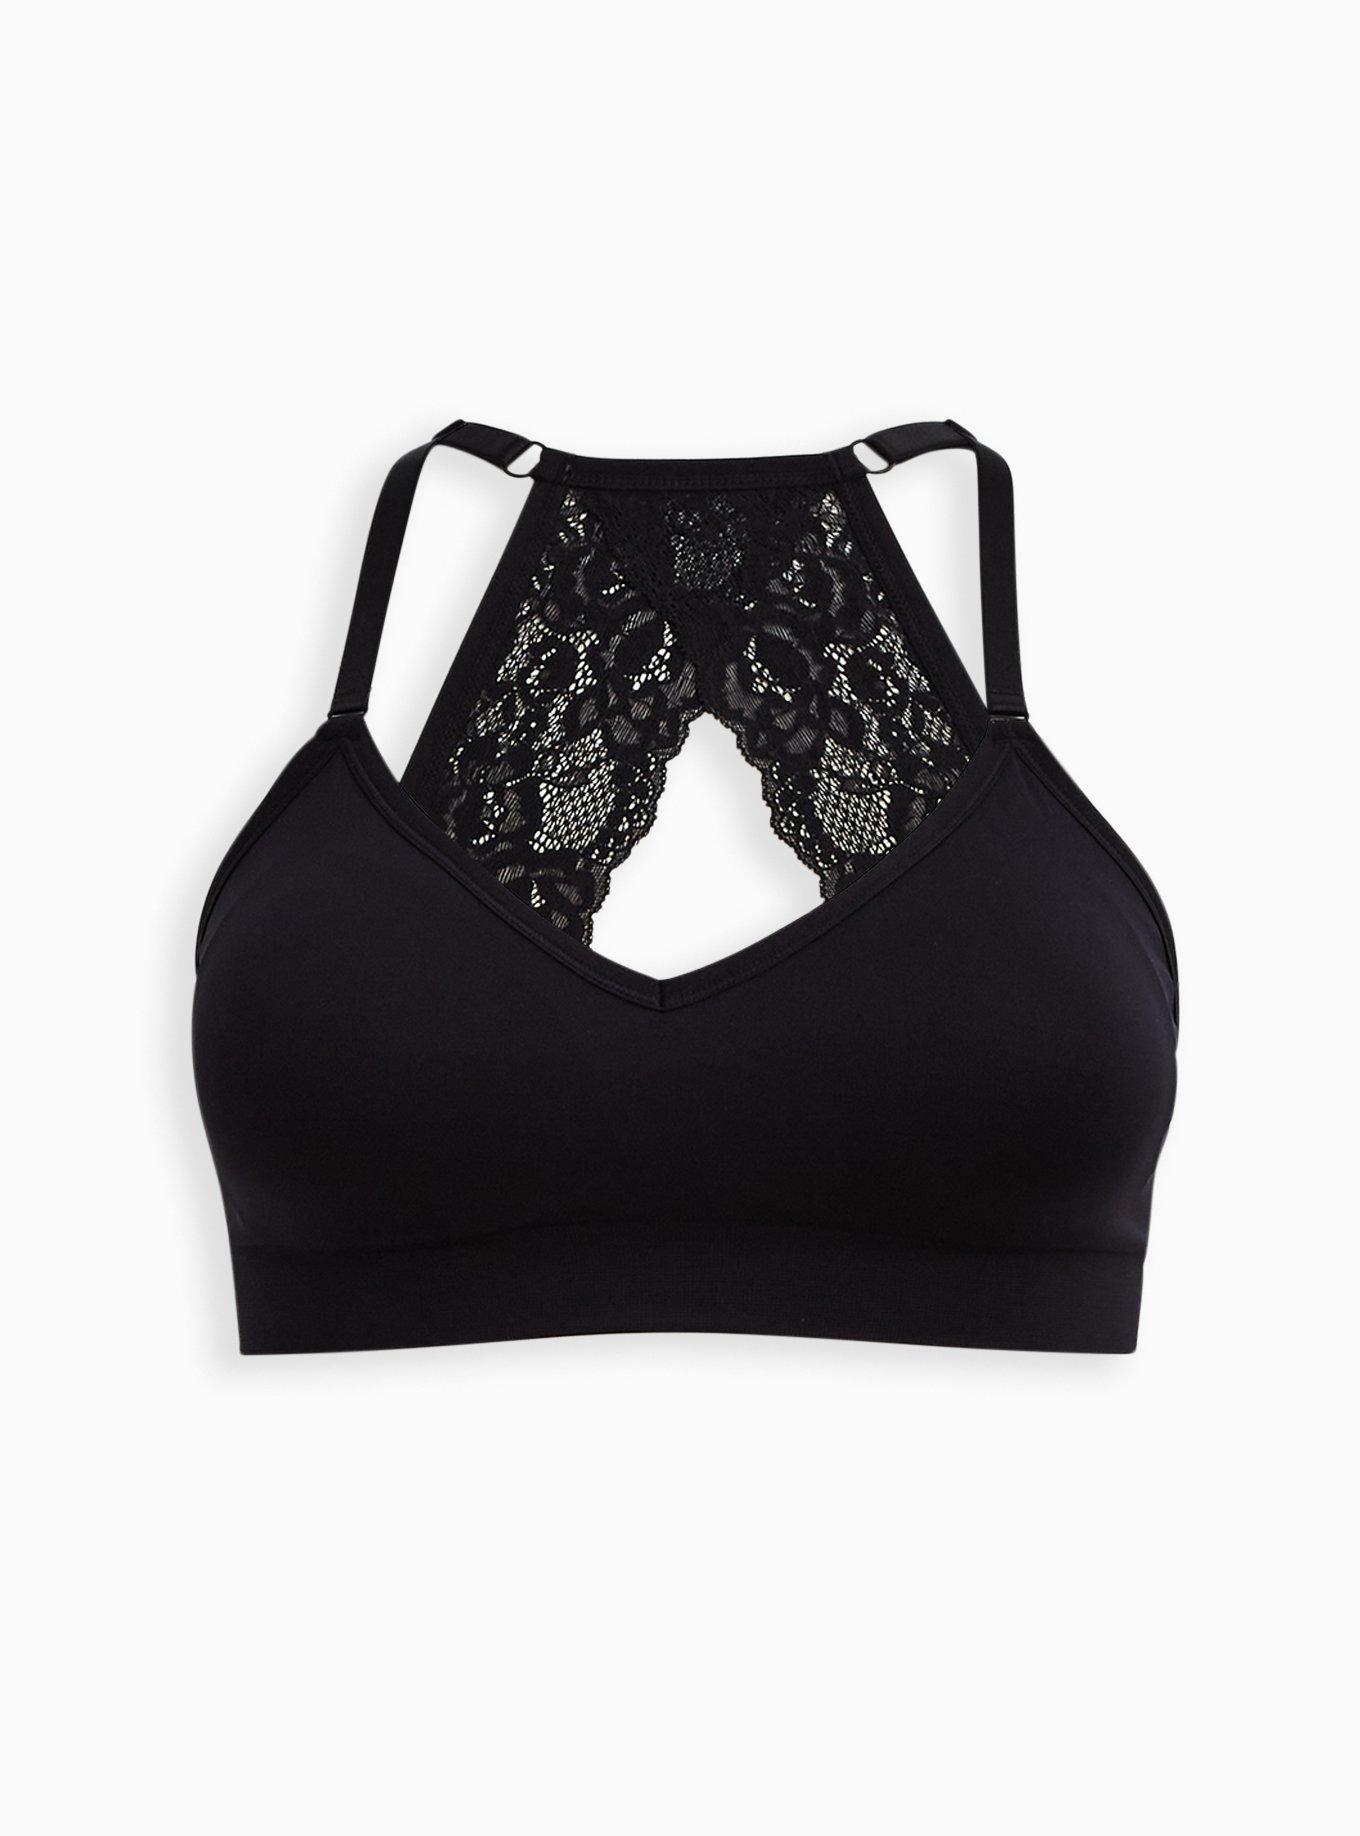 Buy Fame India Summer Bralette Bra Seamless Crop Top Sexy Push up